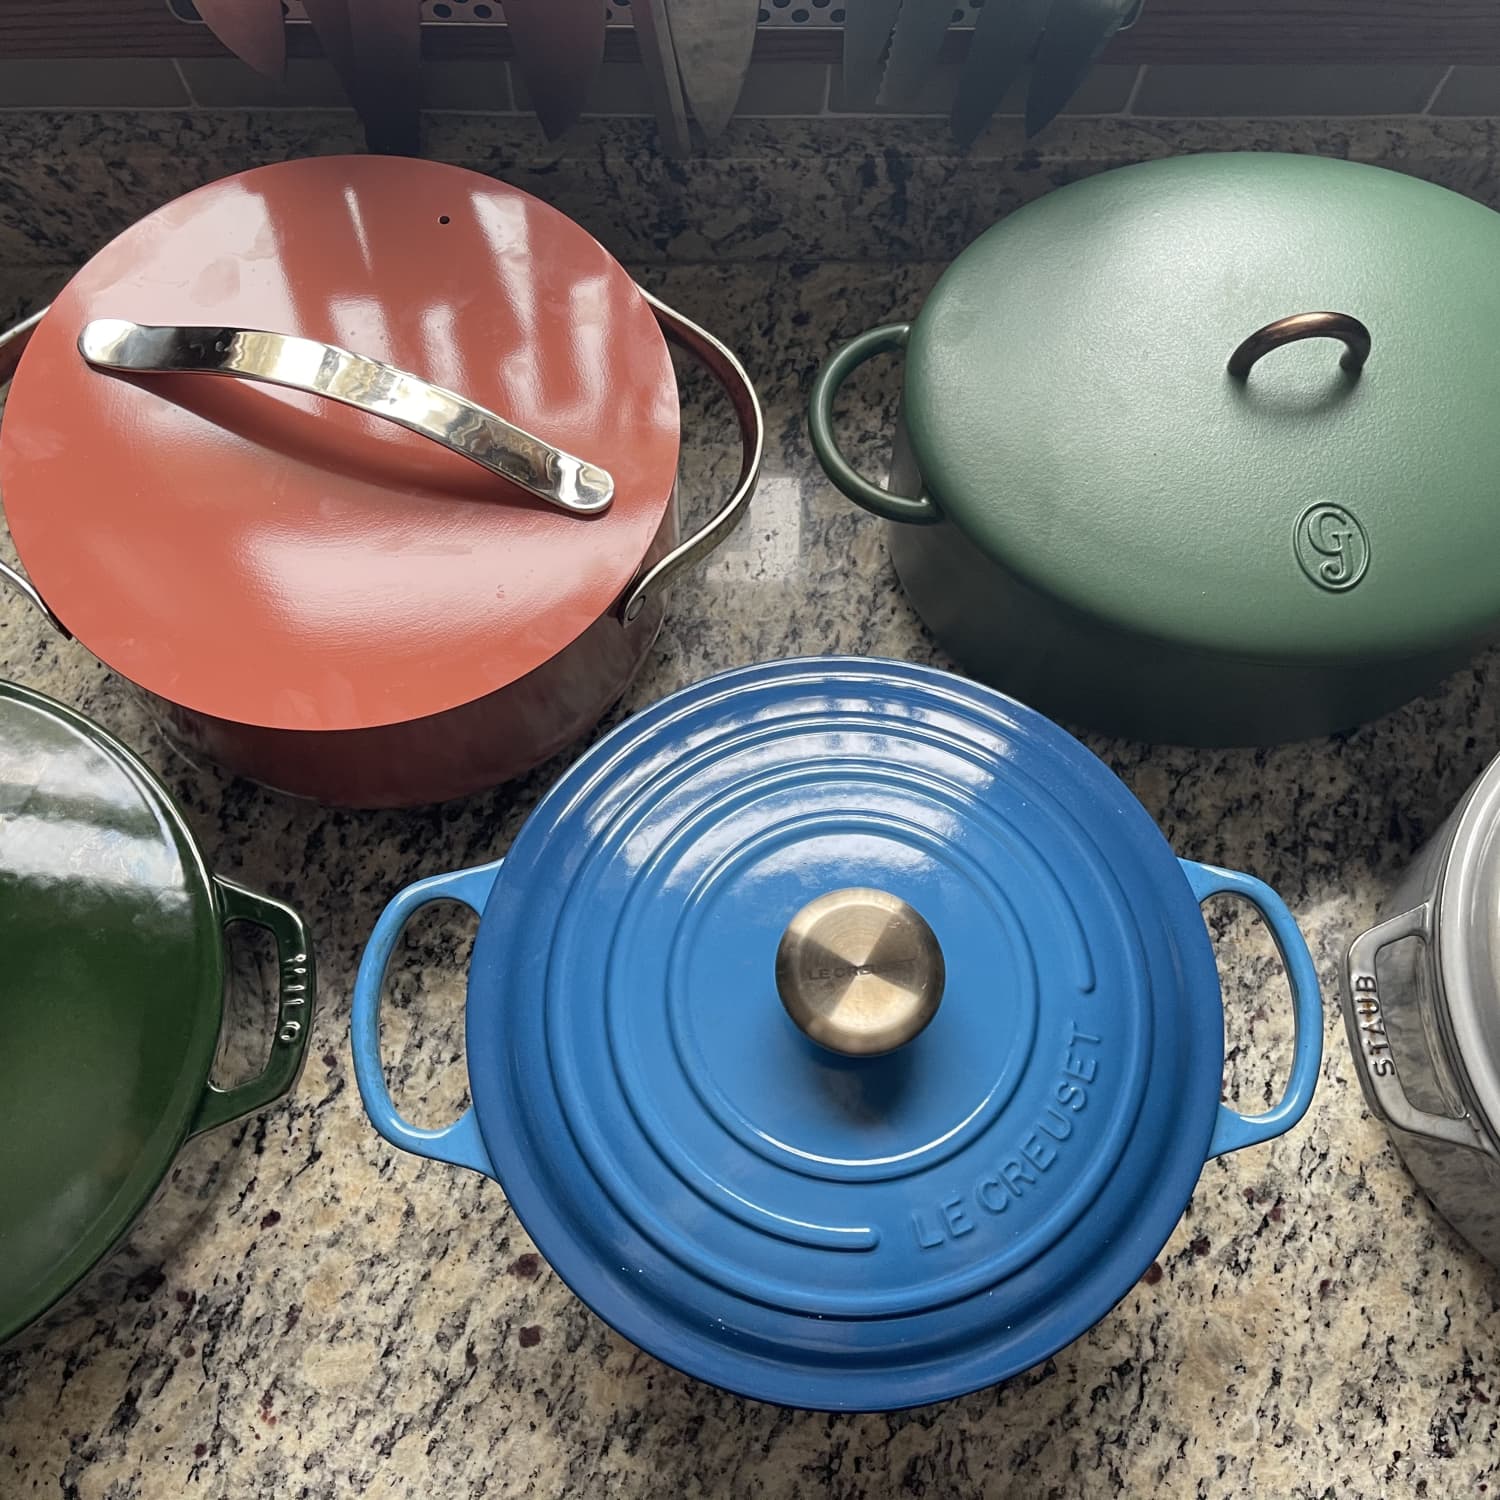 Best Dutch Ovens for 2021: Le Creuset, Lodge, Staub & More